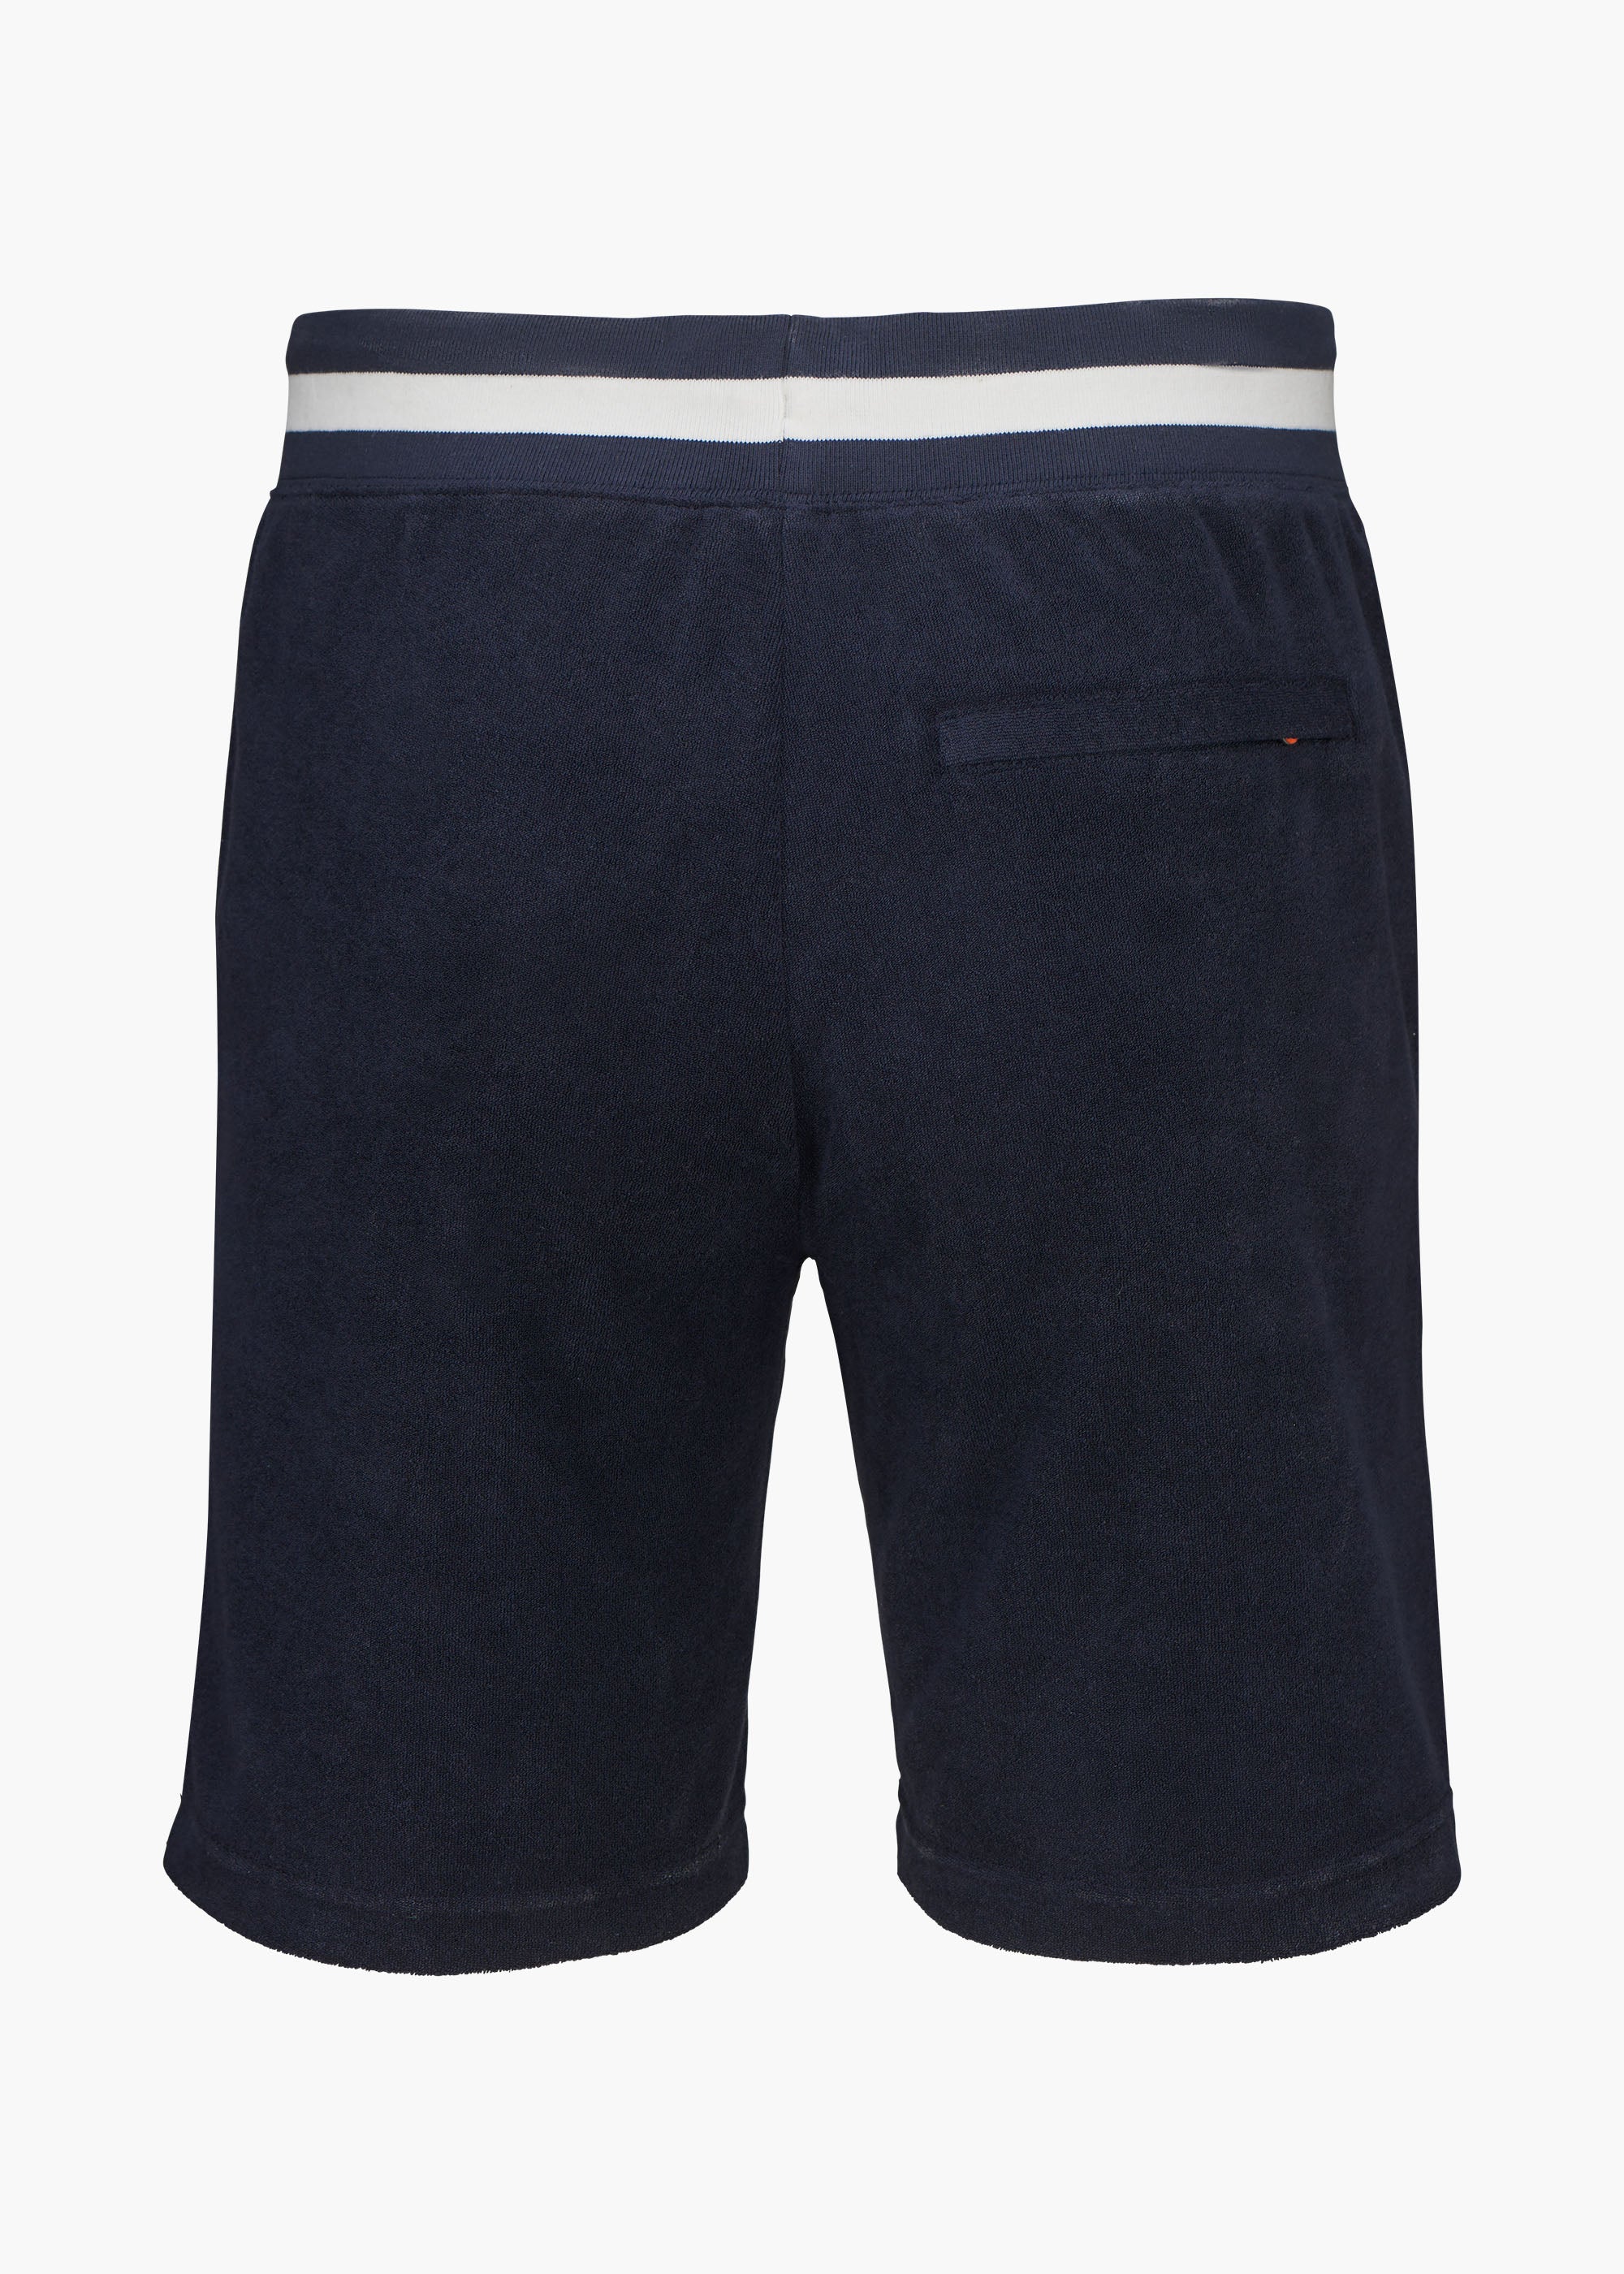 Lido Terry Short - background::white,variant::Navy